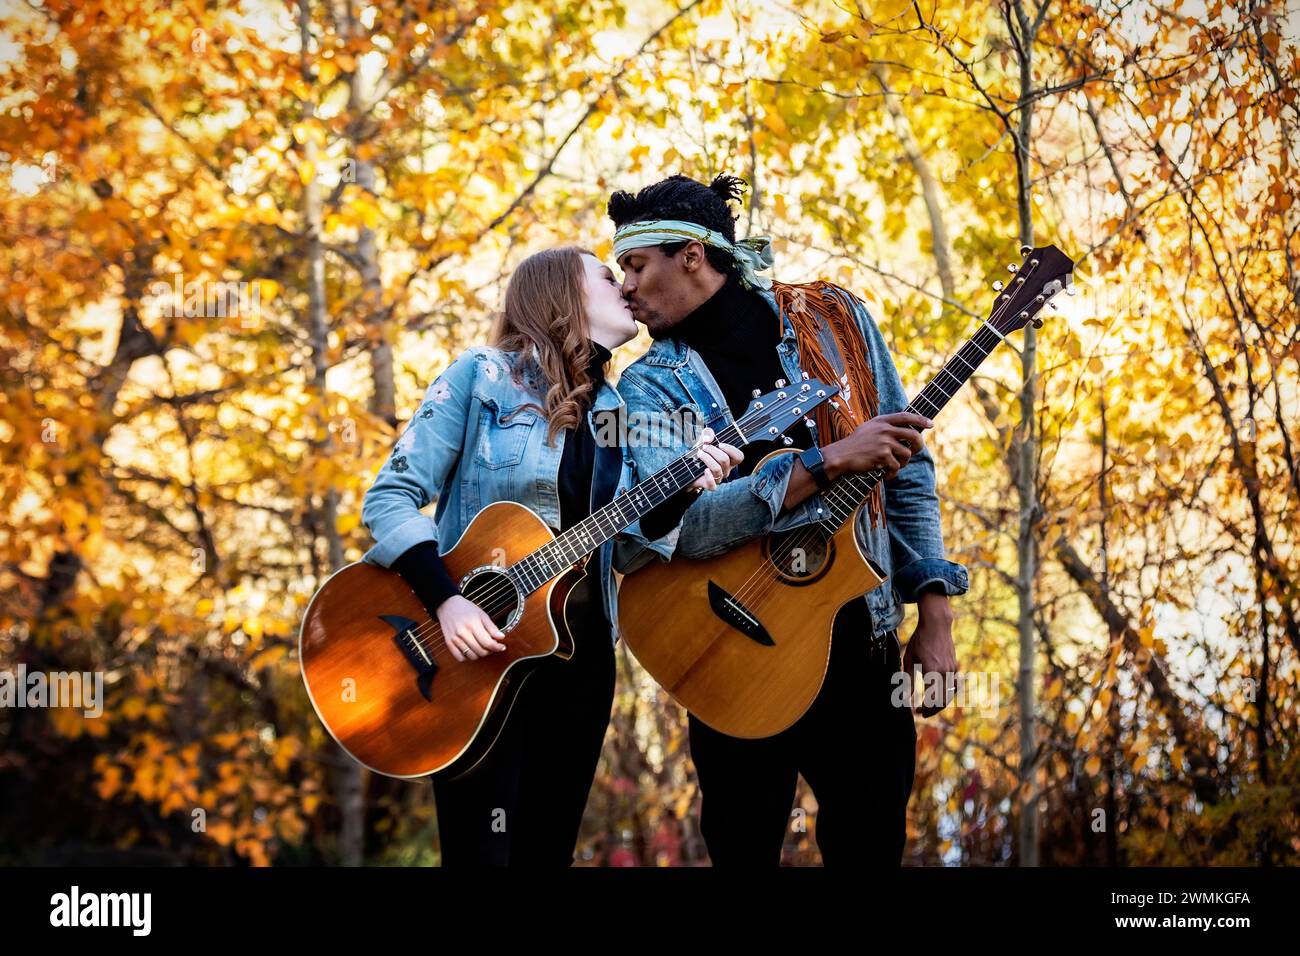 Mixed race married couple standing with guitars, kissing each other during a fall family outing in a city park, spending quality time together Stock Photo